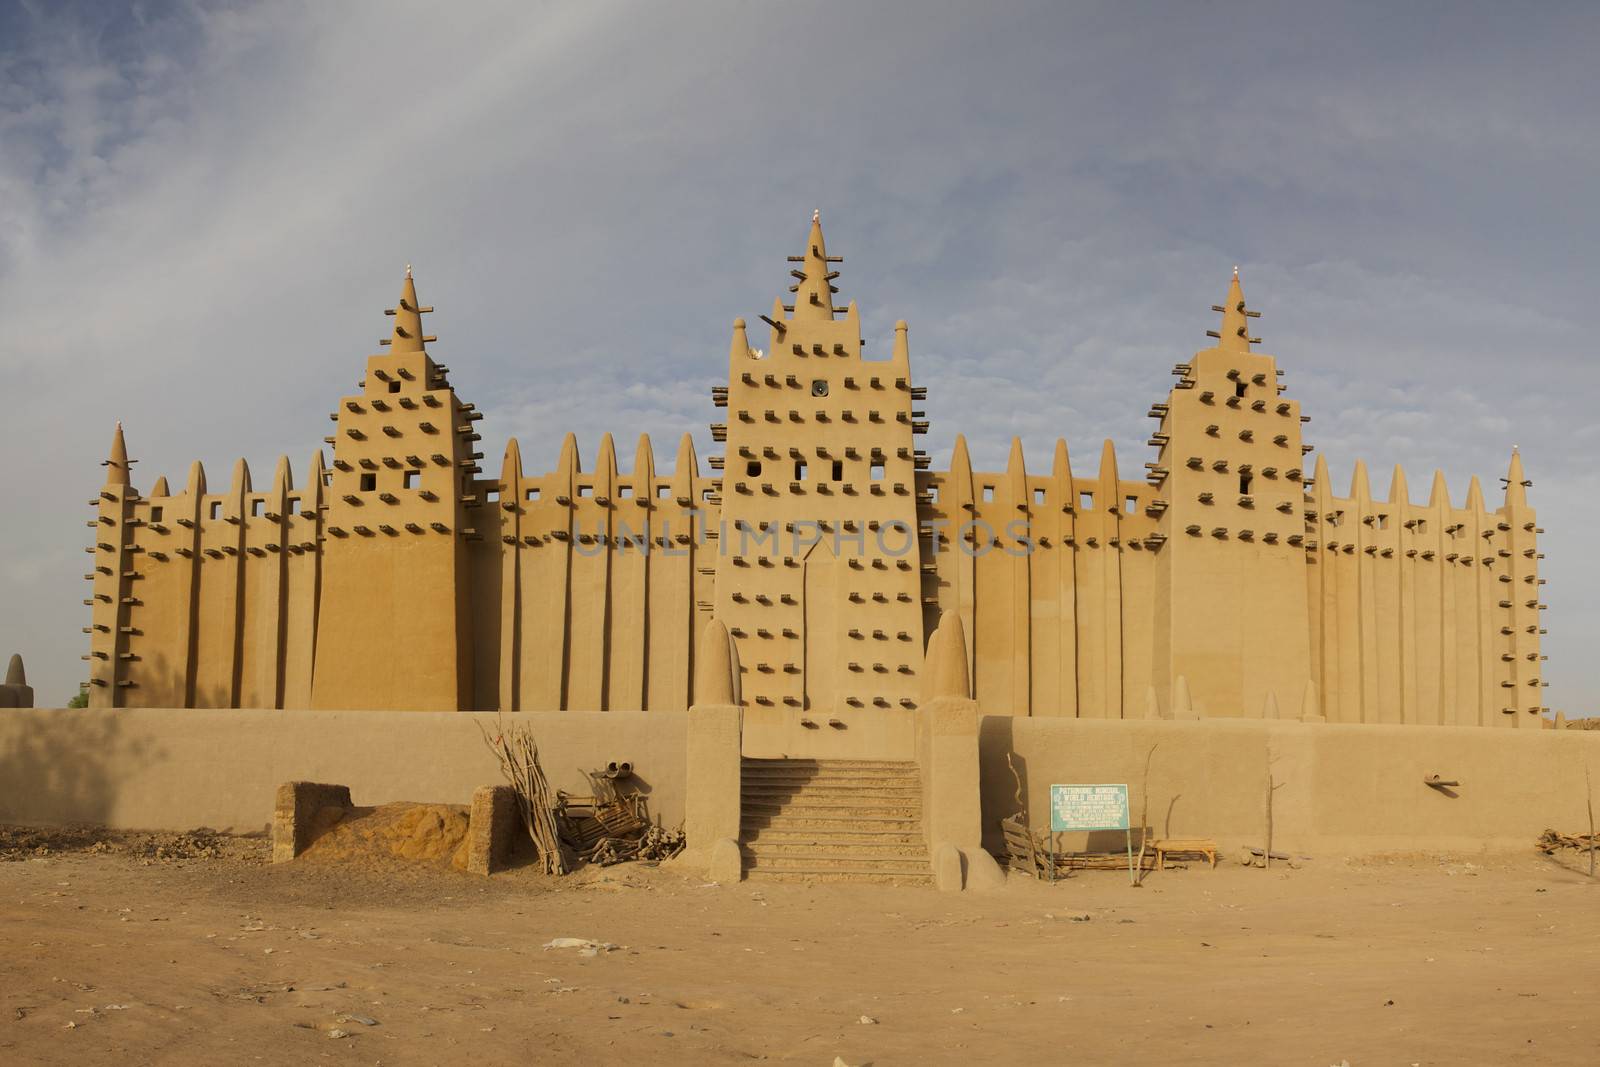 The big mosque in Djenné and the traditional mud building in Mali.